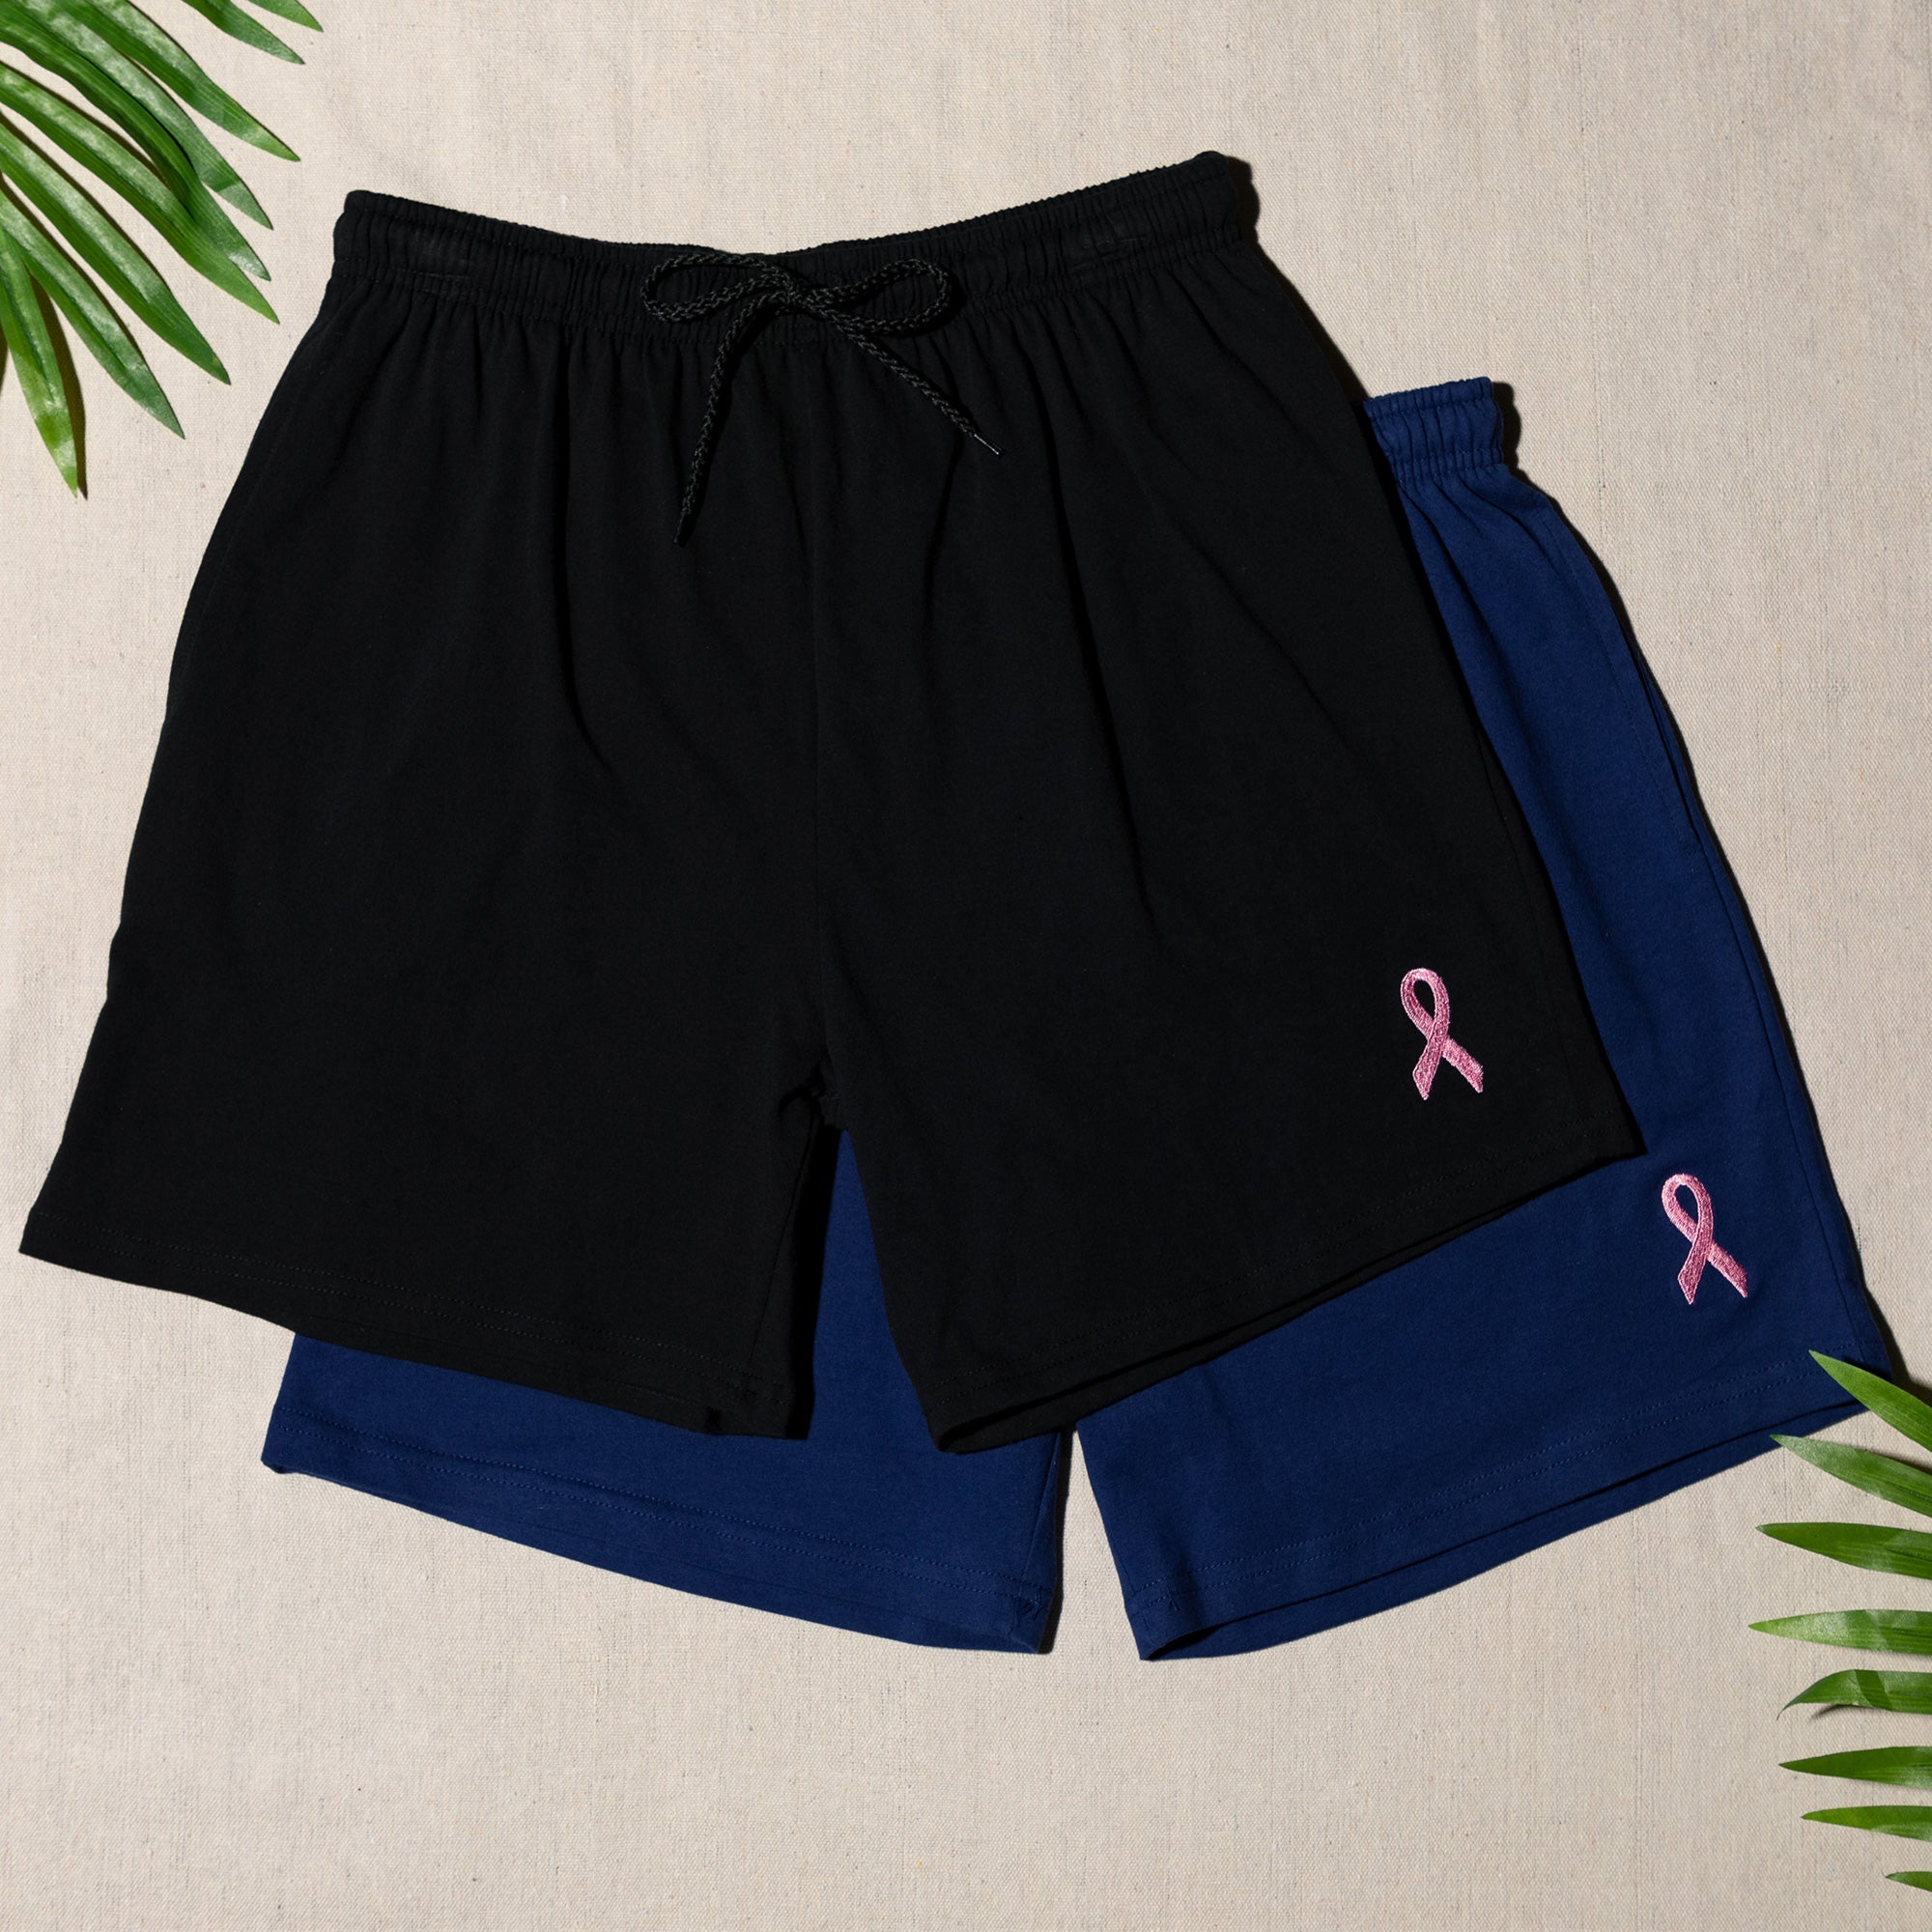 Pink Ribbon Casual Shorts For Women , Breast Cancer Shorts - Navy - S